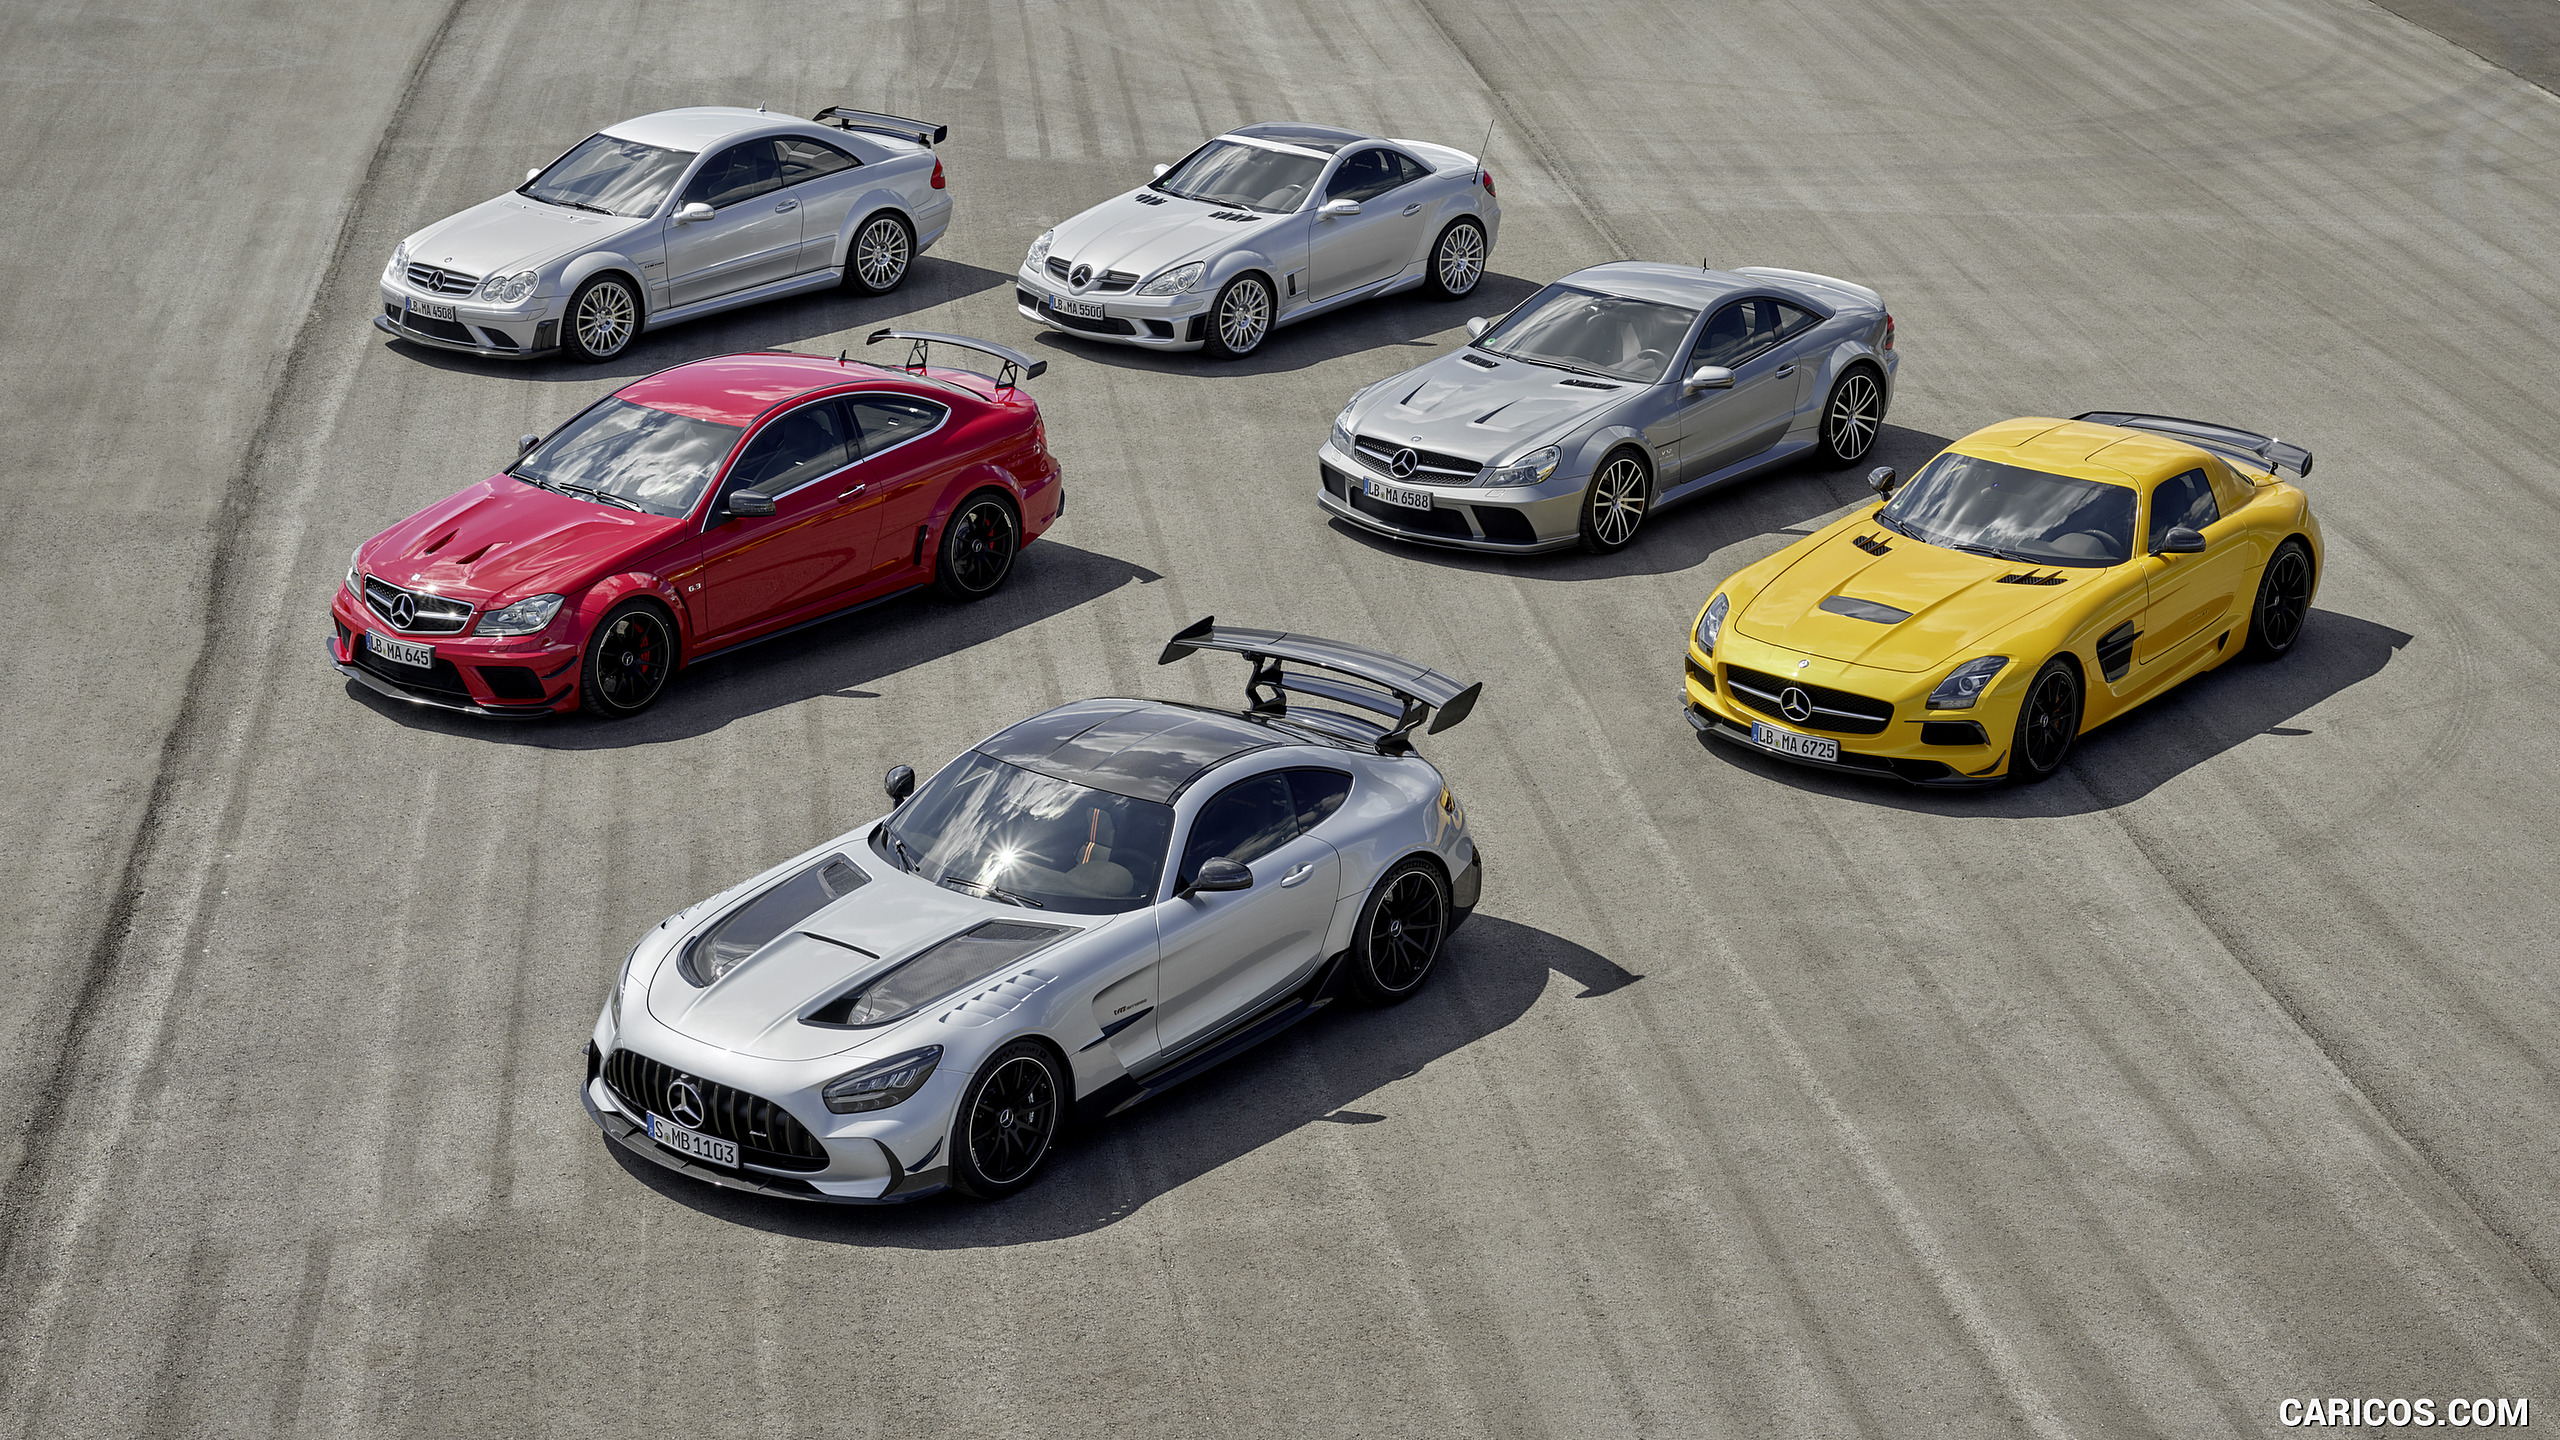 2021 Mercedes-AMG GT Black Series and Previous AMG Black Series Models, #103 of 215